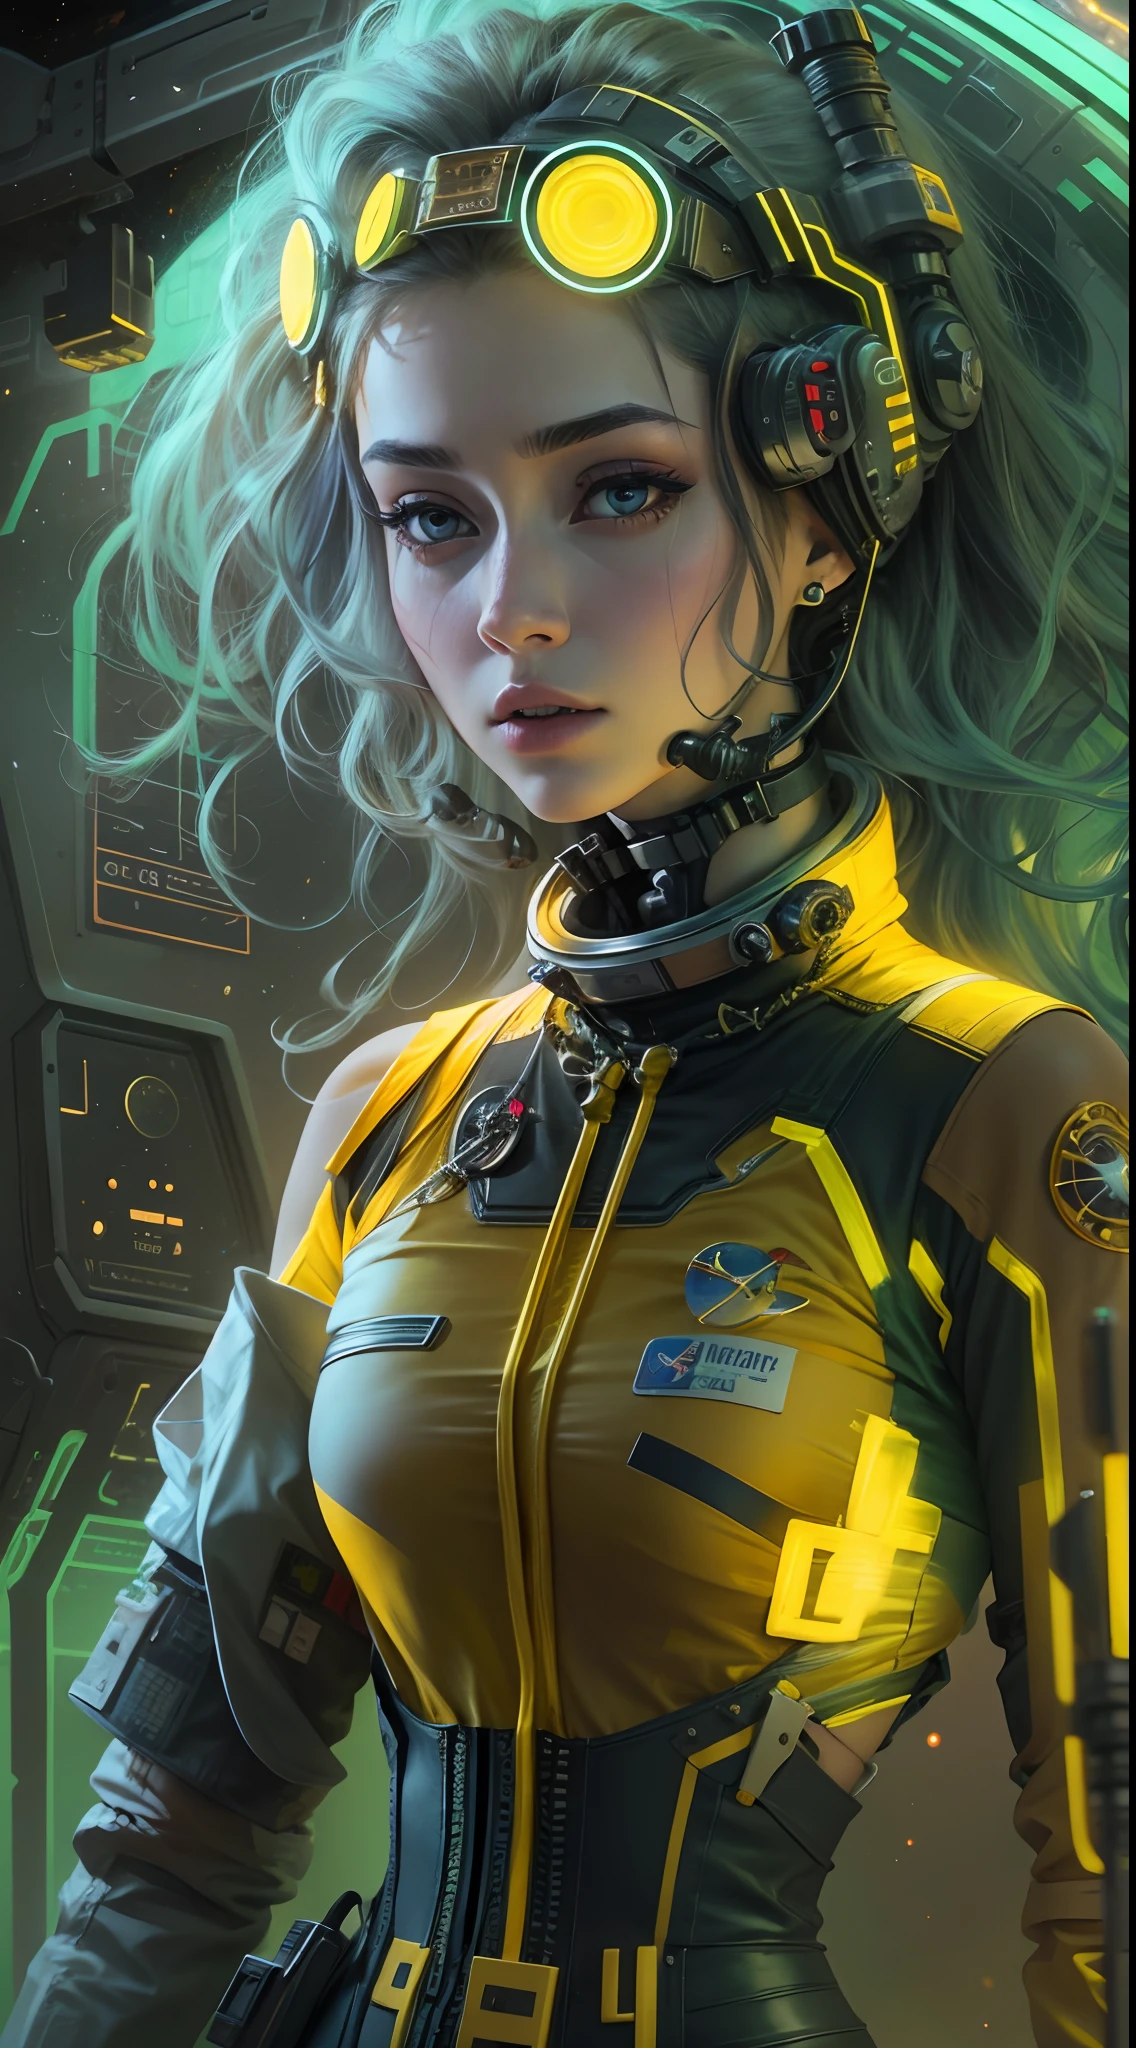 unreal engine:1.4,UHD,The best quality:1.4, photorealistic:1.4, skin texture:1.4, Masterpiece:1.8,Perfect face Girl with yellow cyberpunk dress , half futuristic, Ladybug Big Spot Mix, Long tied blonde hair,cyberpunk style:1.4 ,(Space Station:1.4),（Beautiful and detailed eye description）